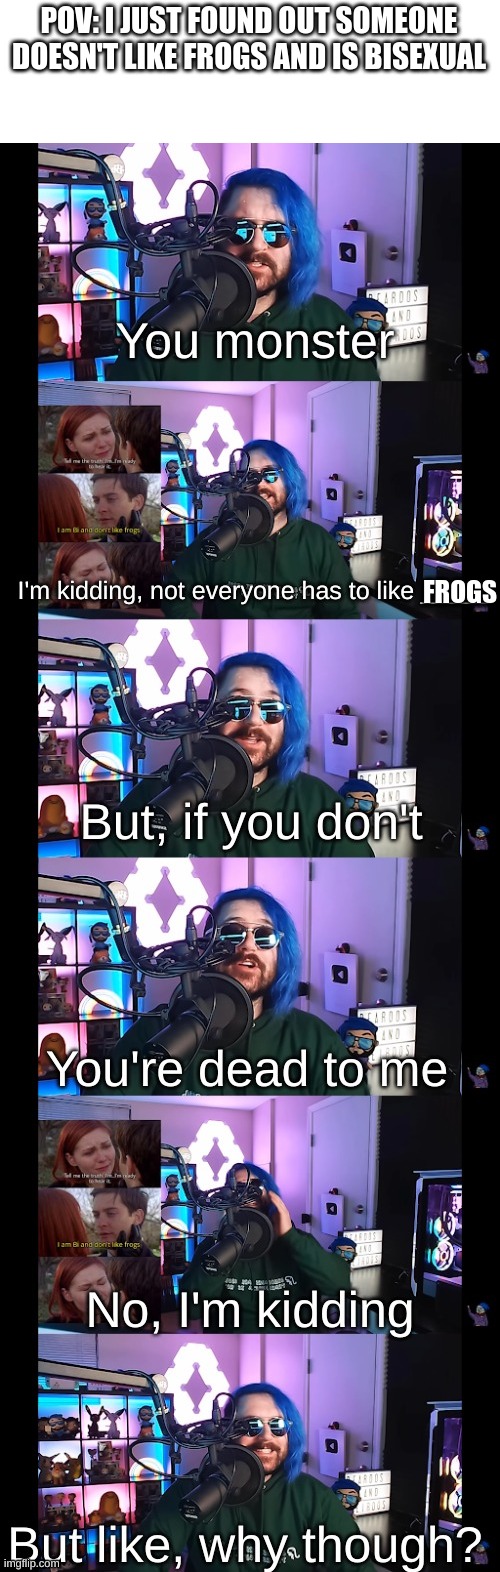 idk | POV: I JUST FOUND OUT SOMEONE DOESN'T LIKE FROGS AND IS BISEXUAL; FROGS | image tagged in ot template,frog,bisexual,meme | made w/ Imgflip meme maker